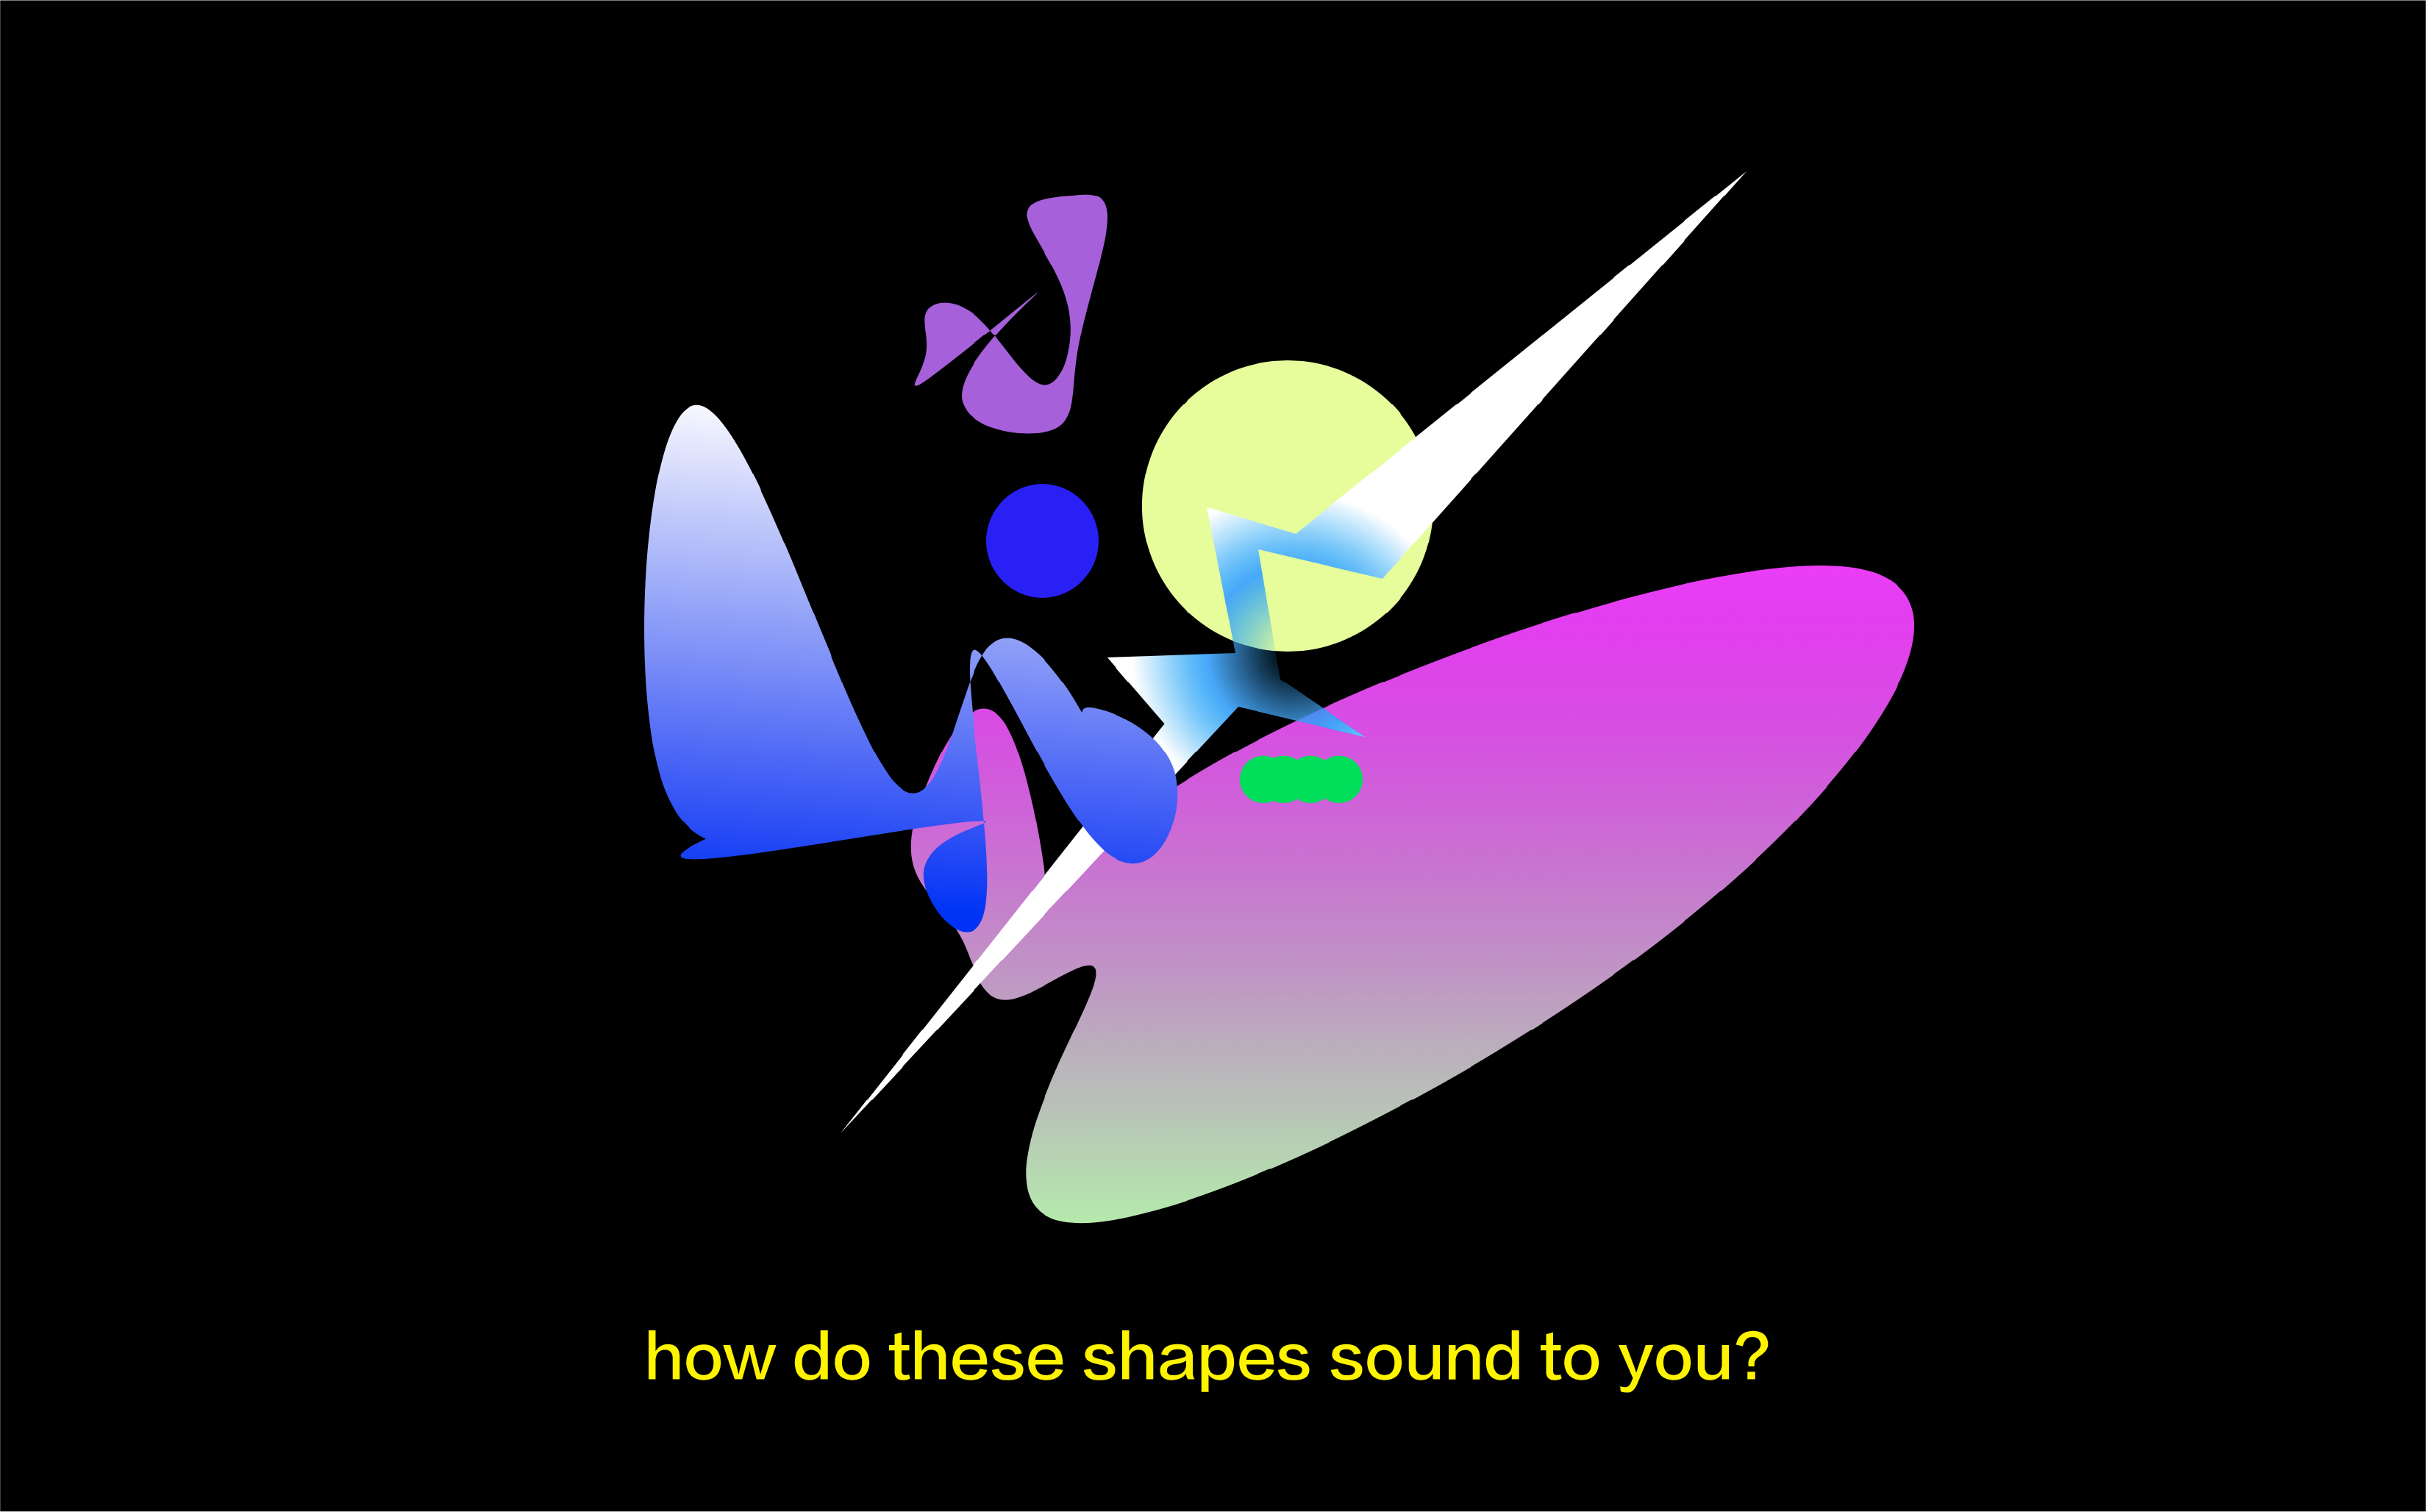 CAN YOU HEAR YOUR DRAWING? Creating synesthetic experiences through  an audio-visual web interaction